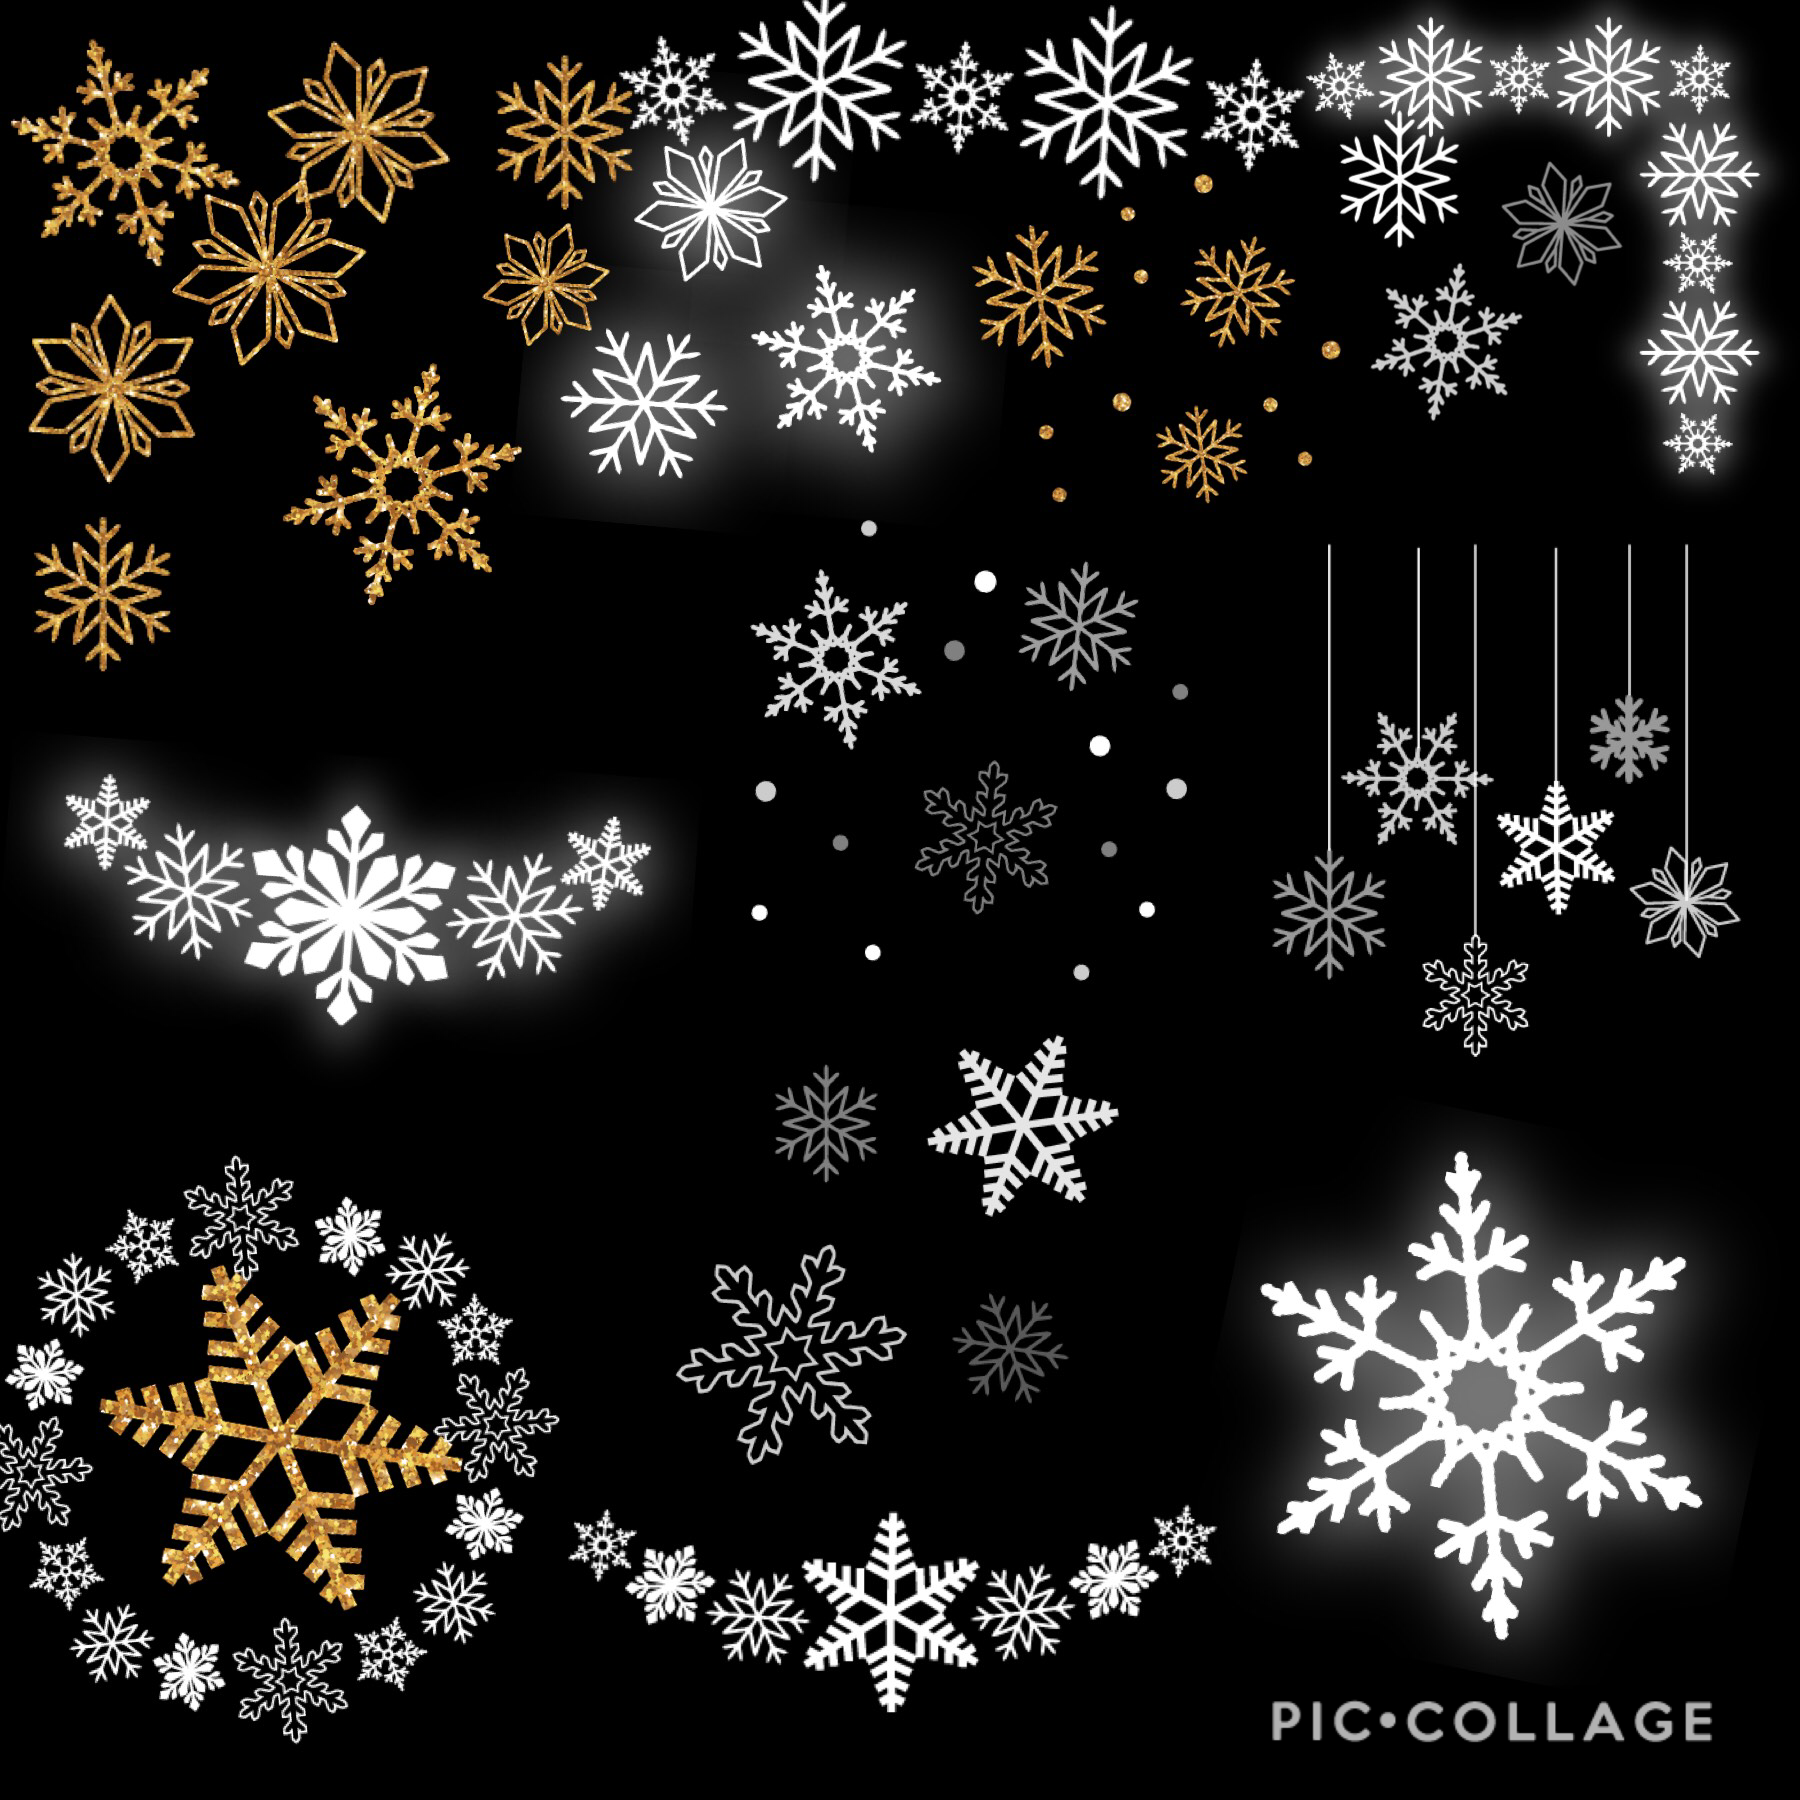 There are snowflakes yay